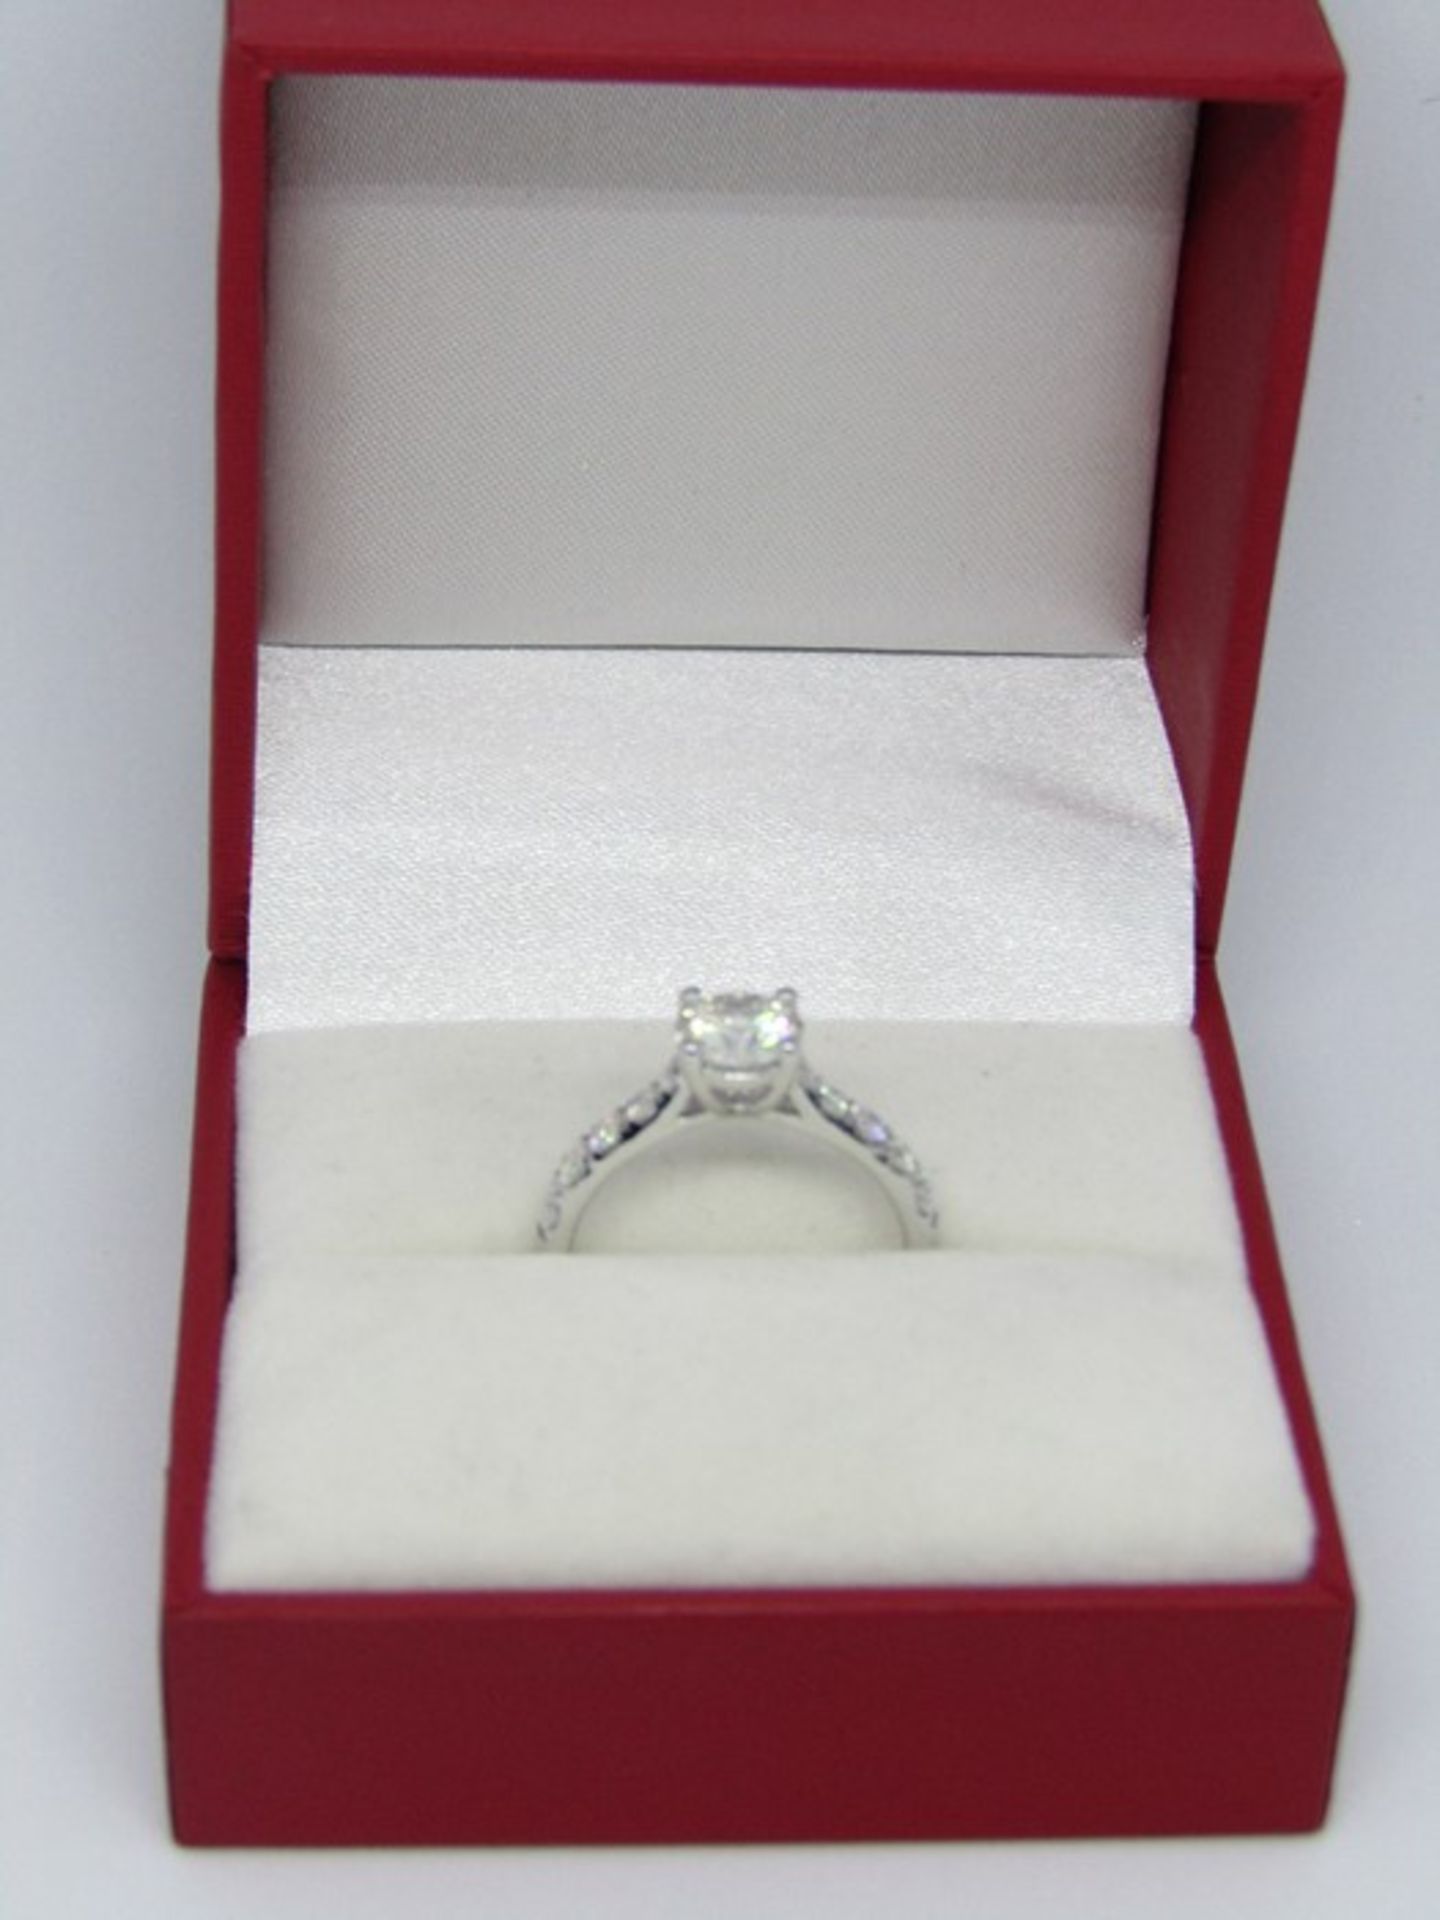 Stunning 1ct Moissanite Stone Engagement or Special Occasion Ring Set in 18ct White Gold RRP £1495 - Image 4 of 4